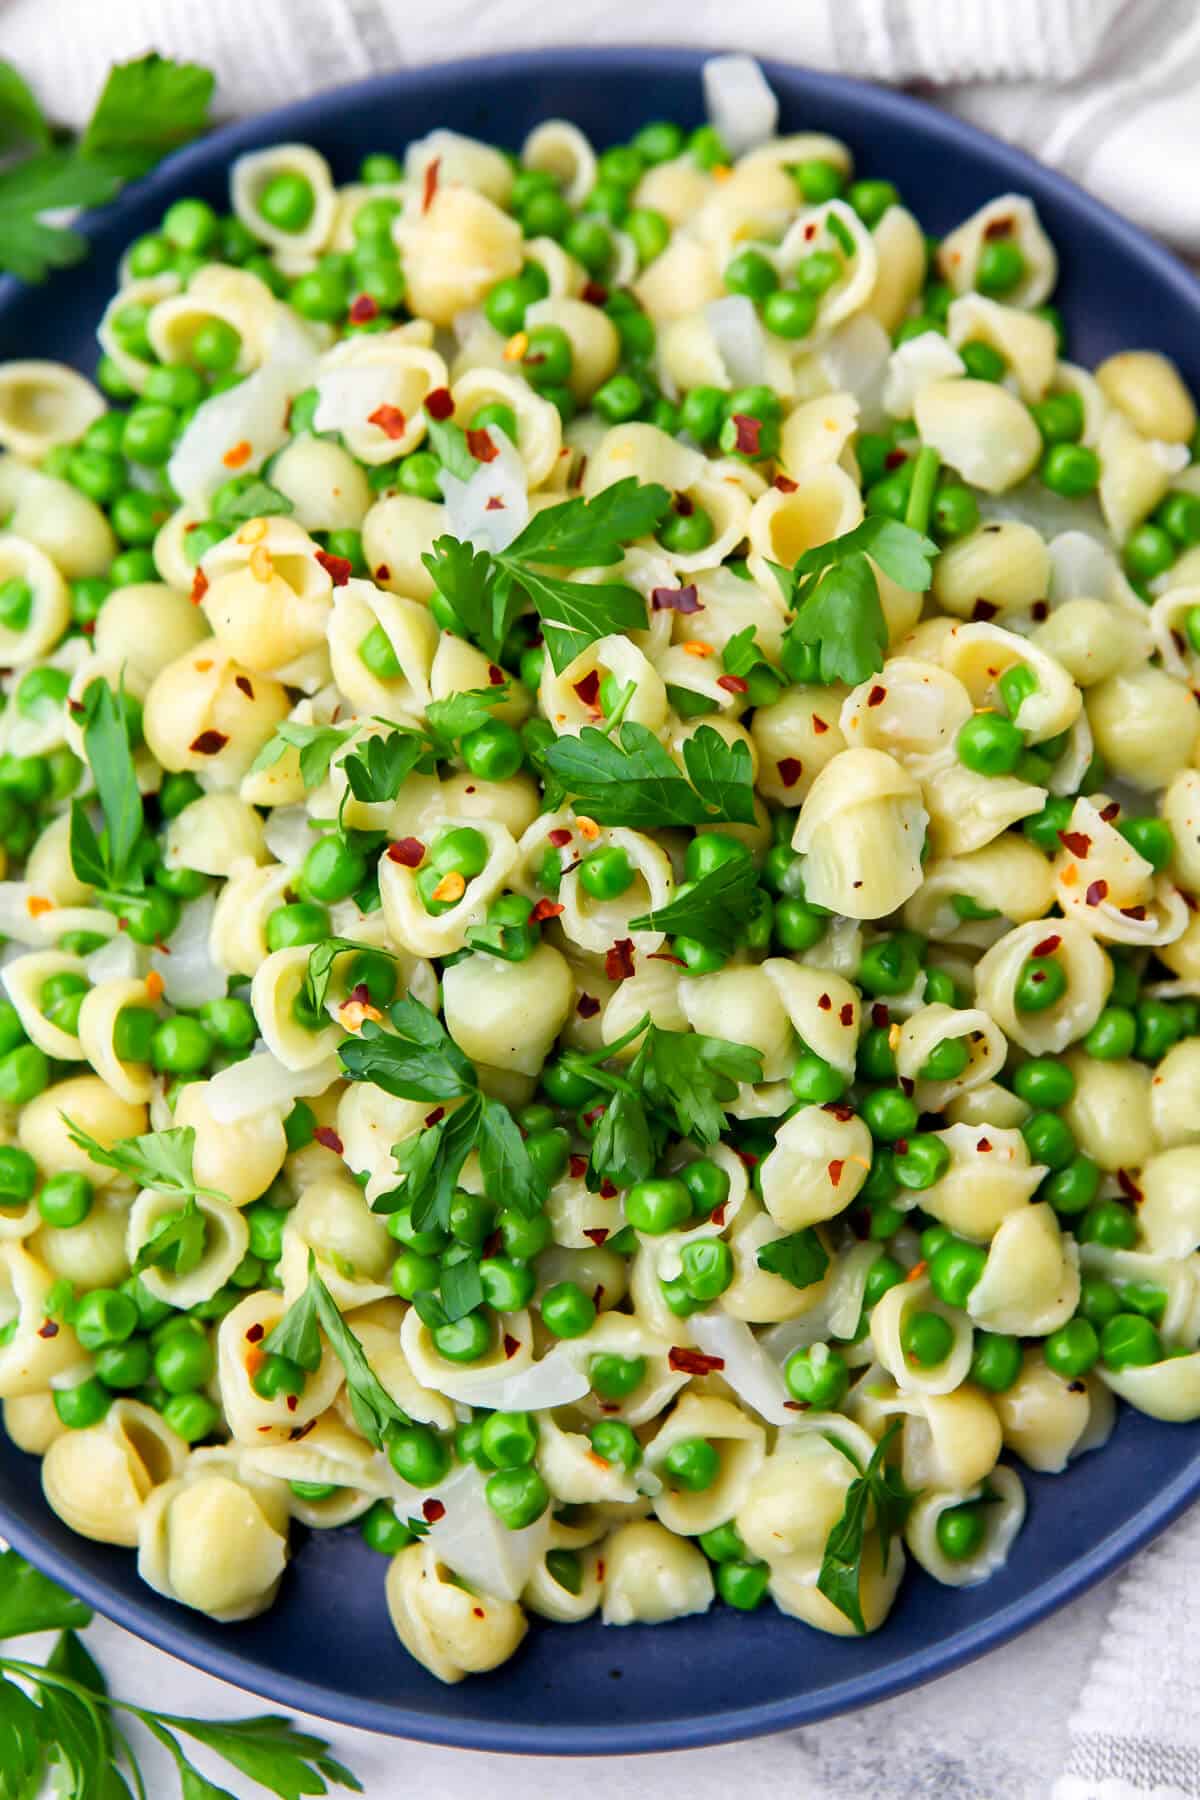 A top view of a plate full of pasta and peas garnished with parsley and red pepper flakes.